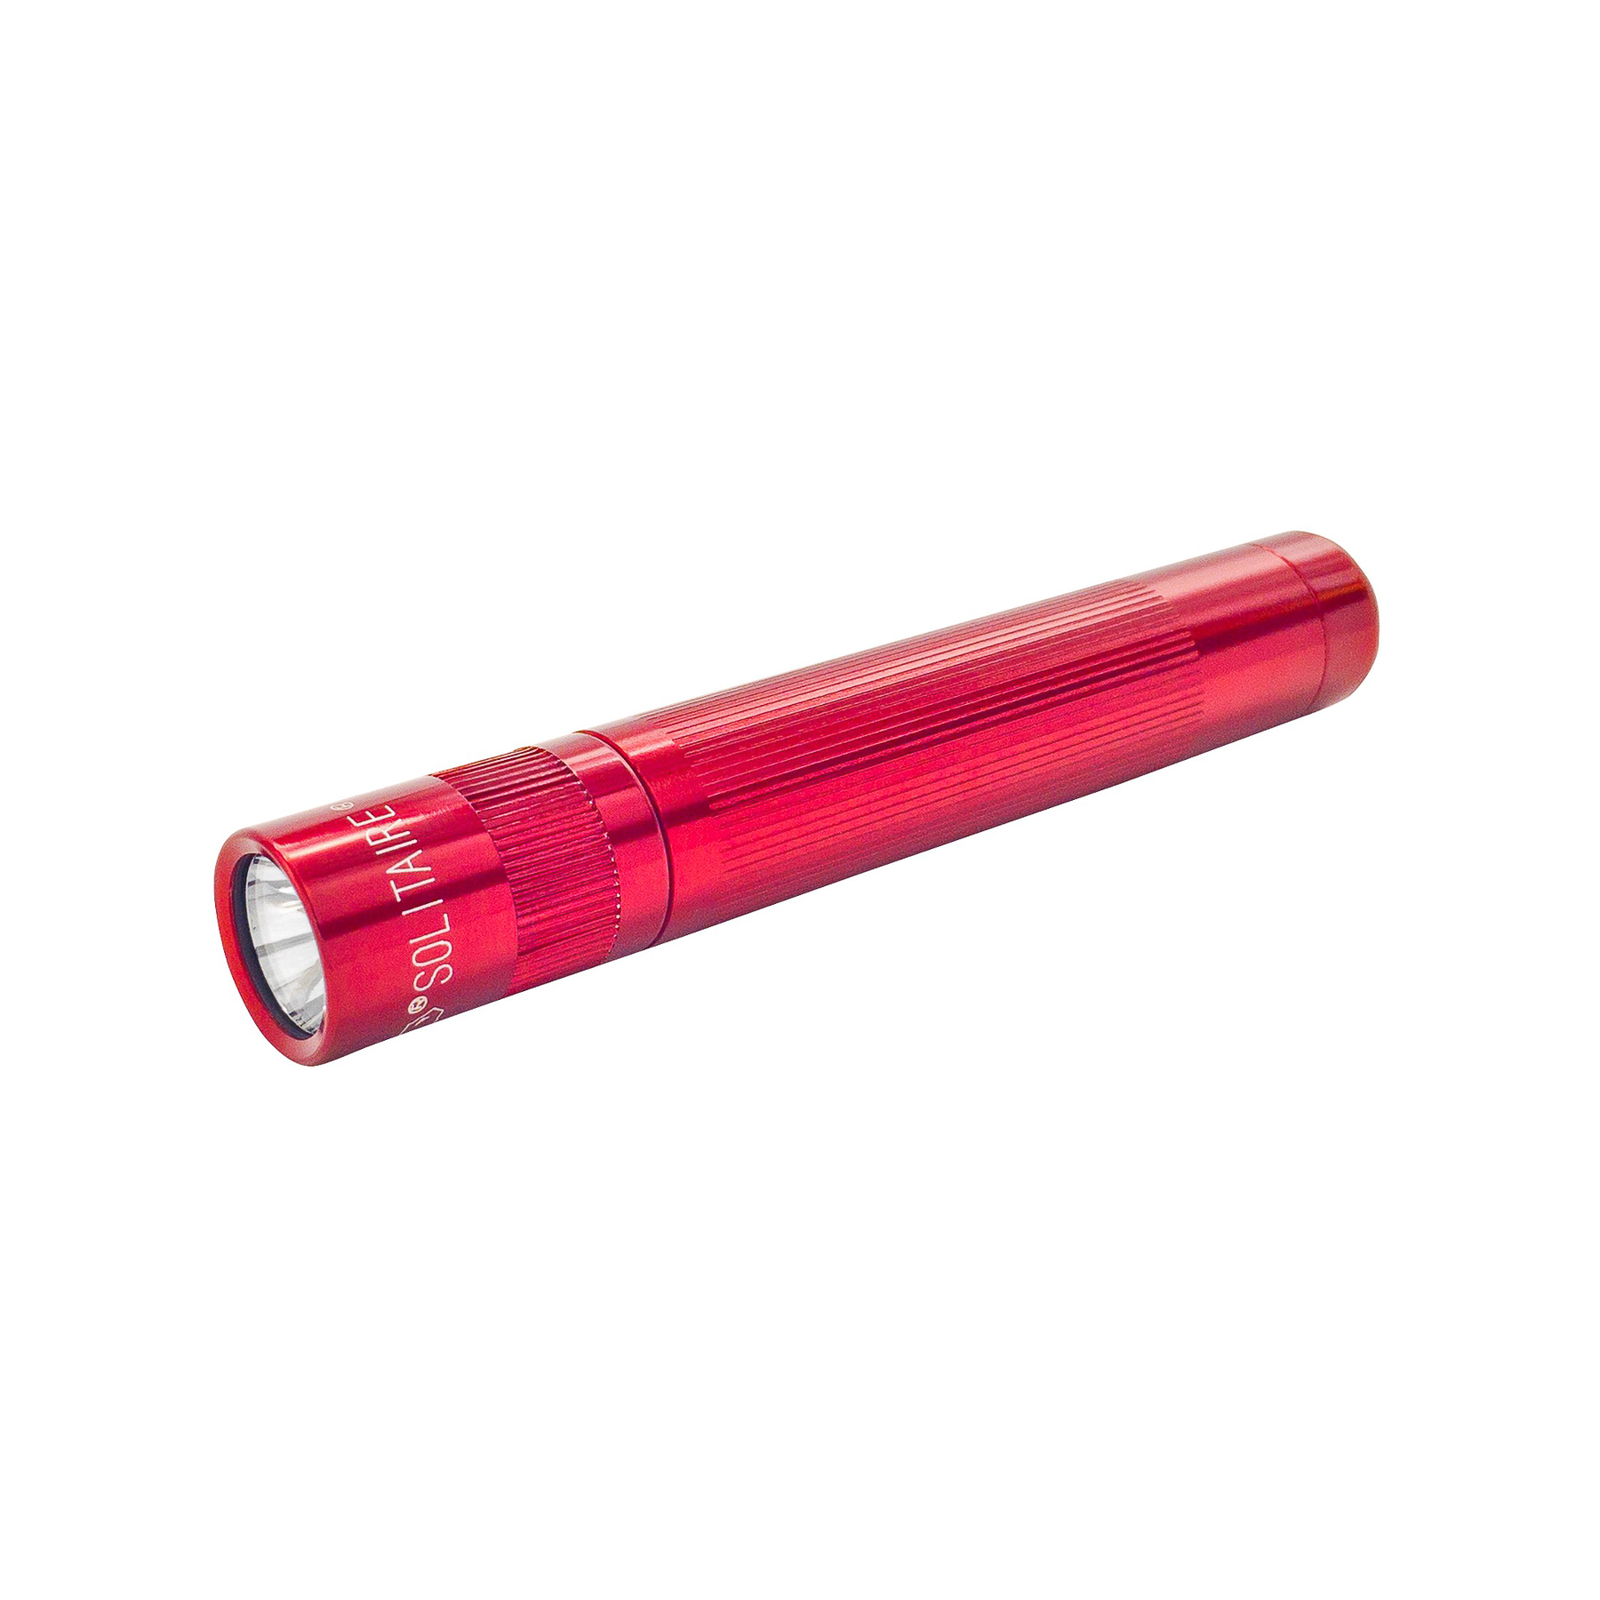 Maglite Xenon lommelygte Solitaire 1-celle AAA rød